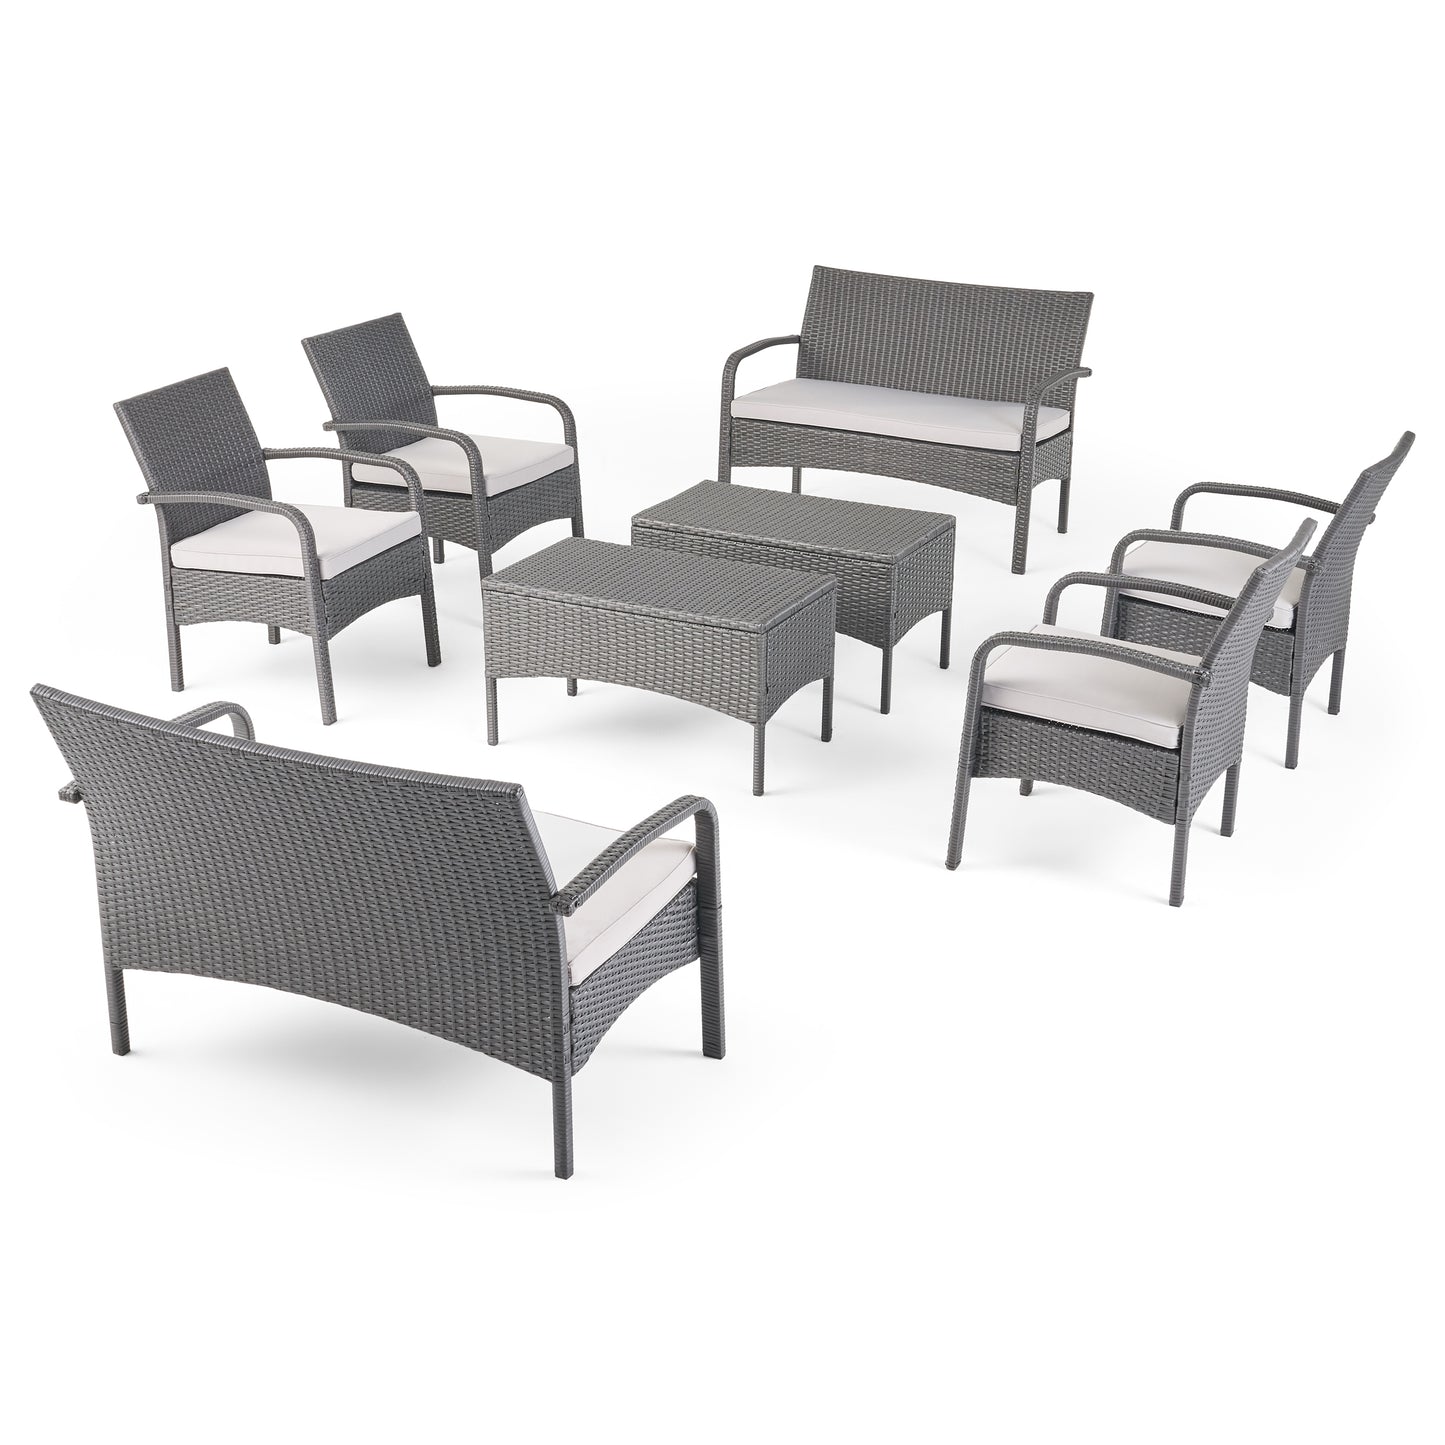 Carmela Outdoor 8 Seater Wicker Chat Set with Cushions